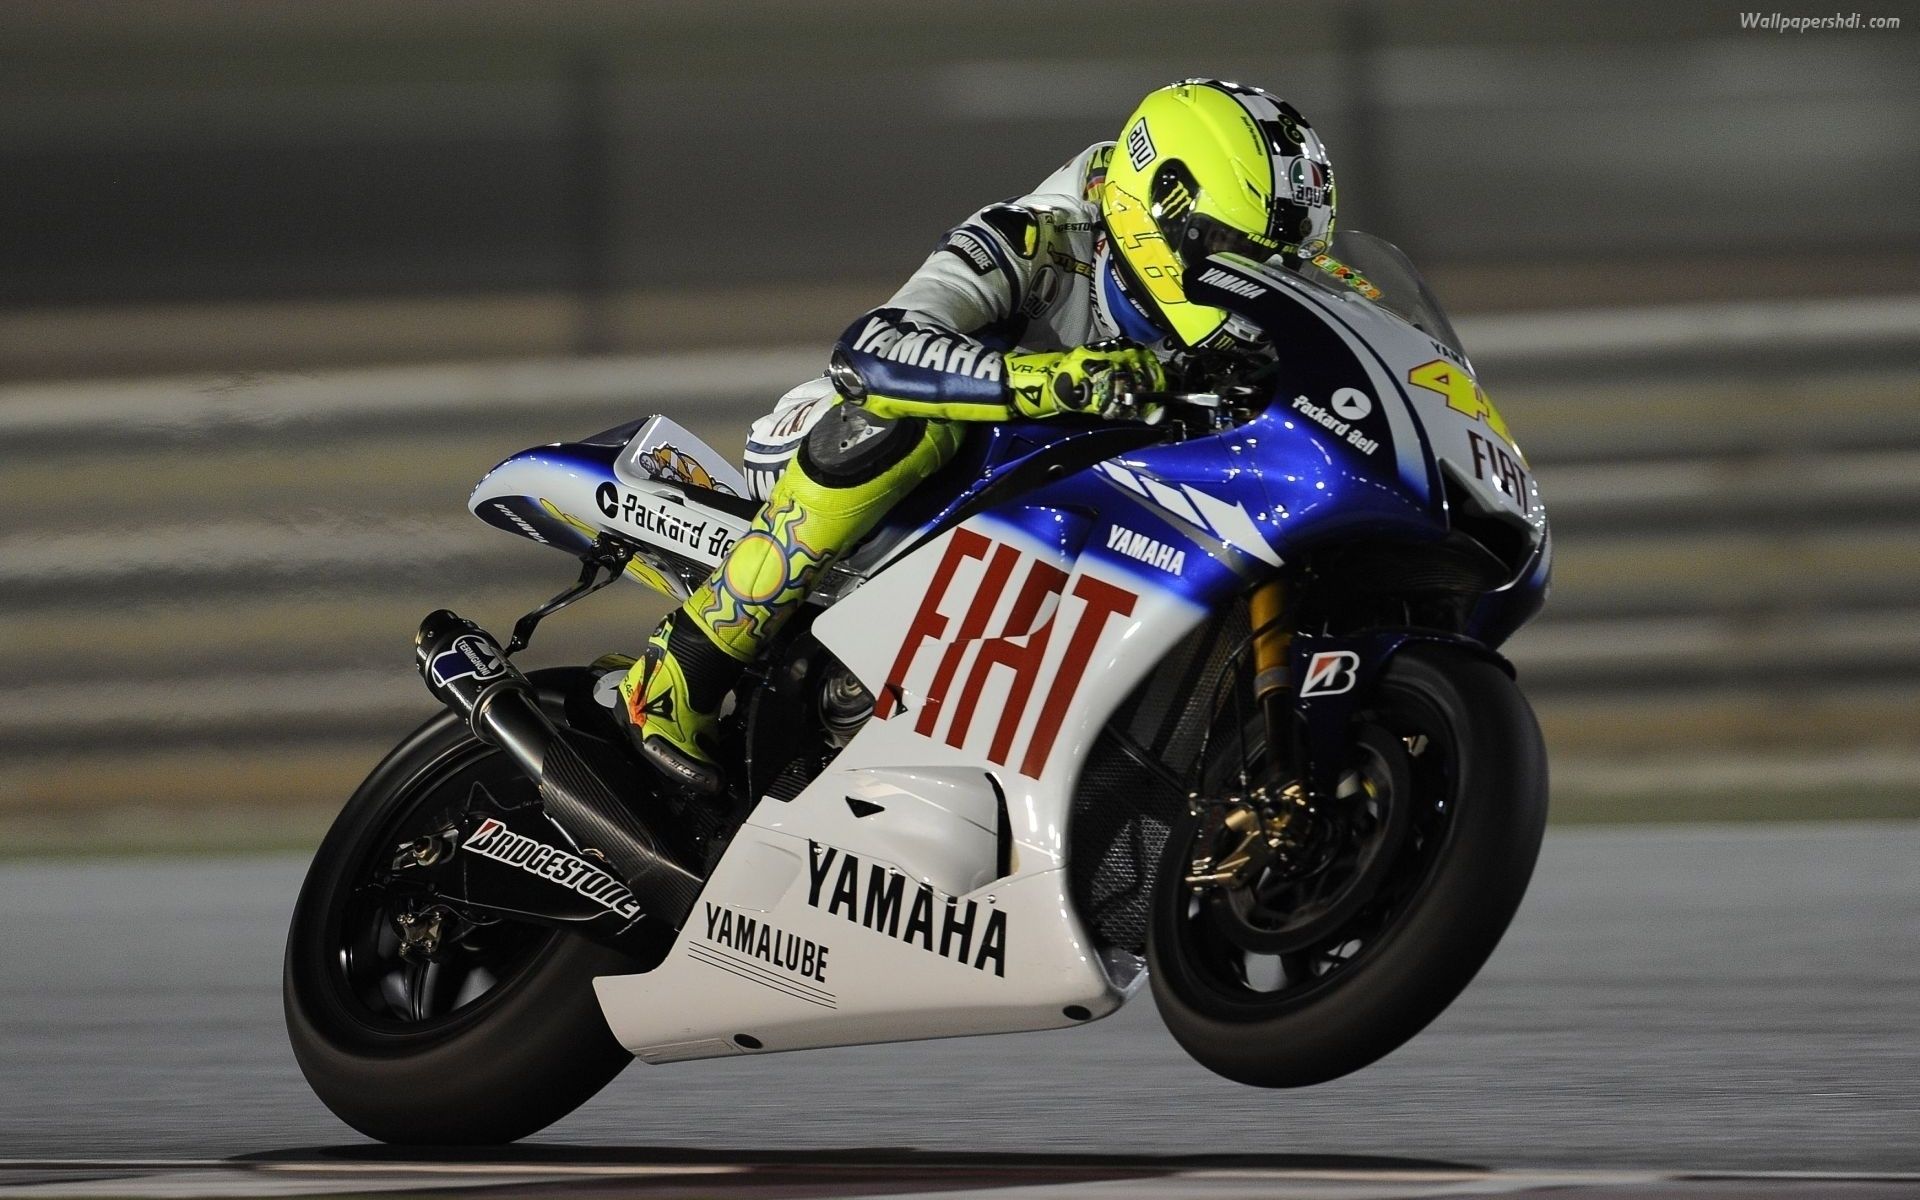  Valentino Rossi Hintergrundbild 1920x1200. Rossi 4K wallpaper for your desktop or mobile screen free and easy to download